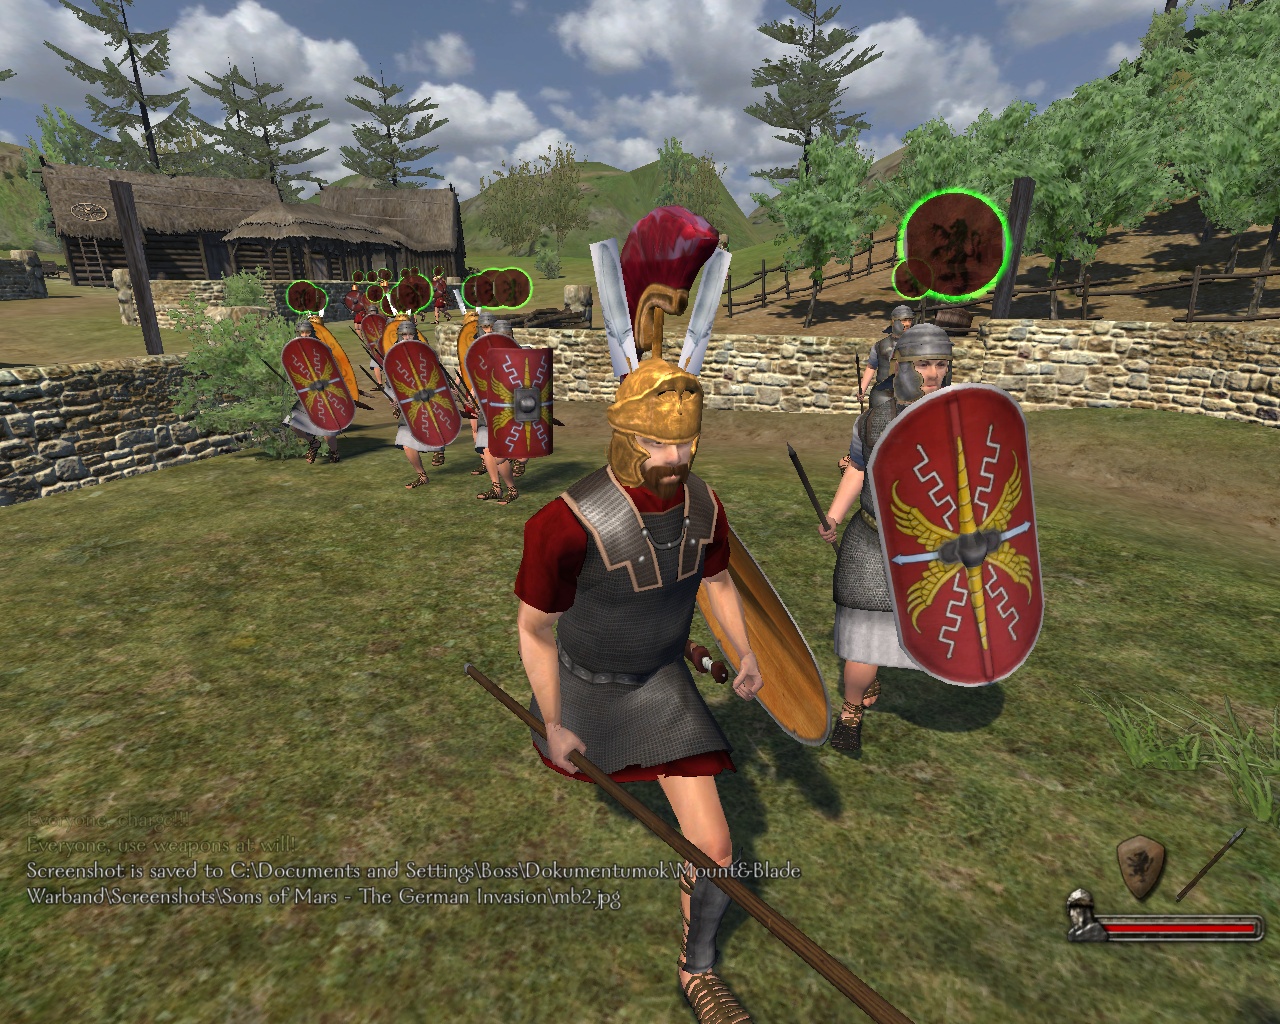 mount and blade warband 1.153 serial key